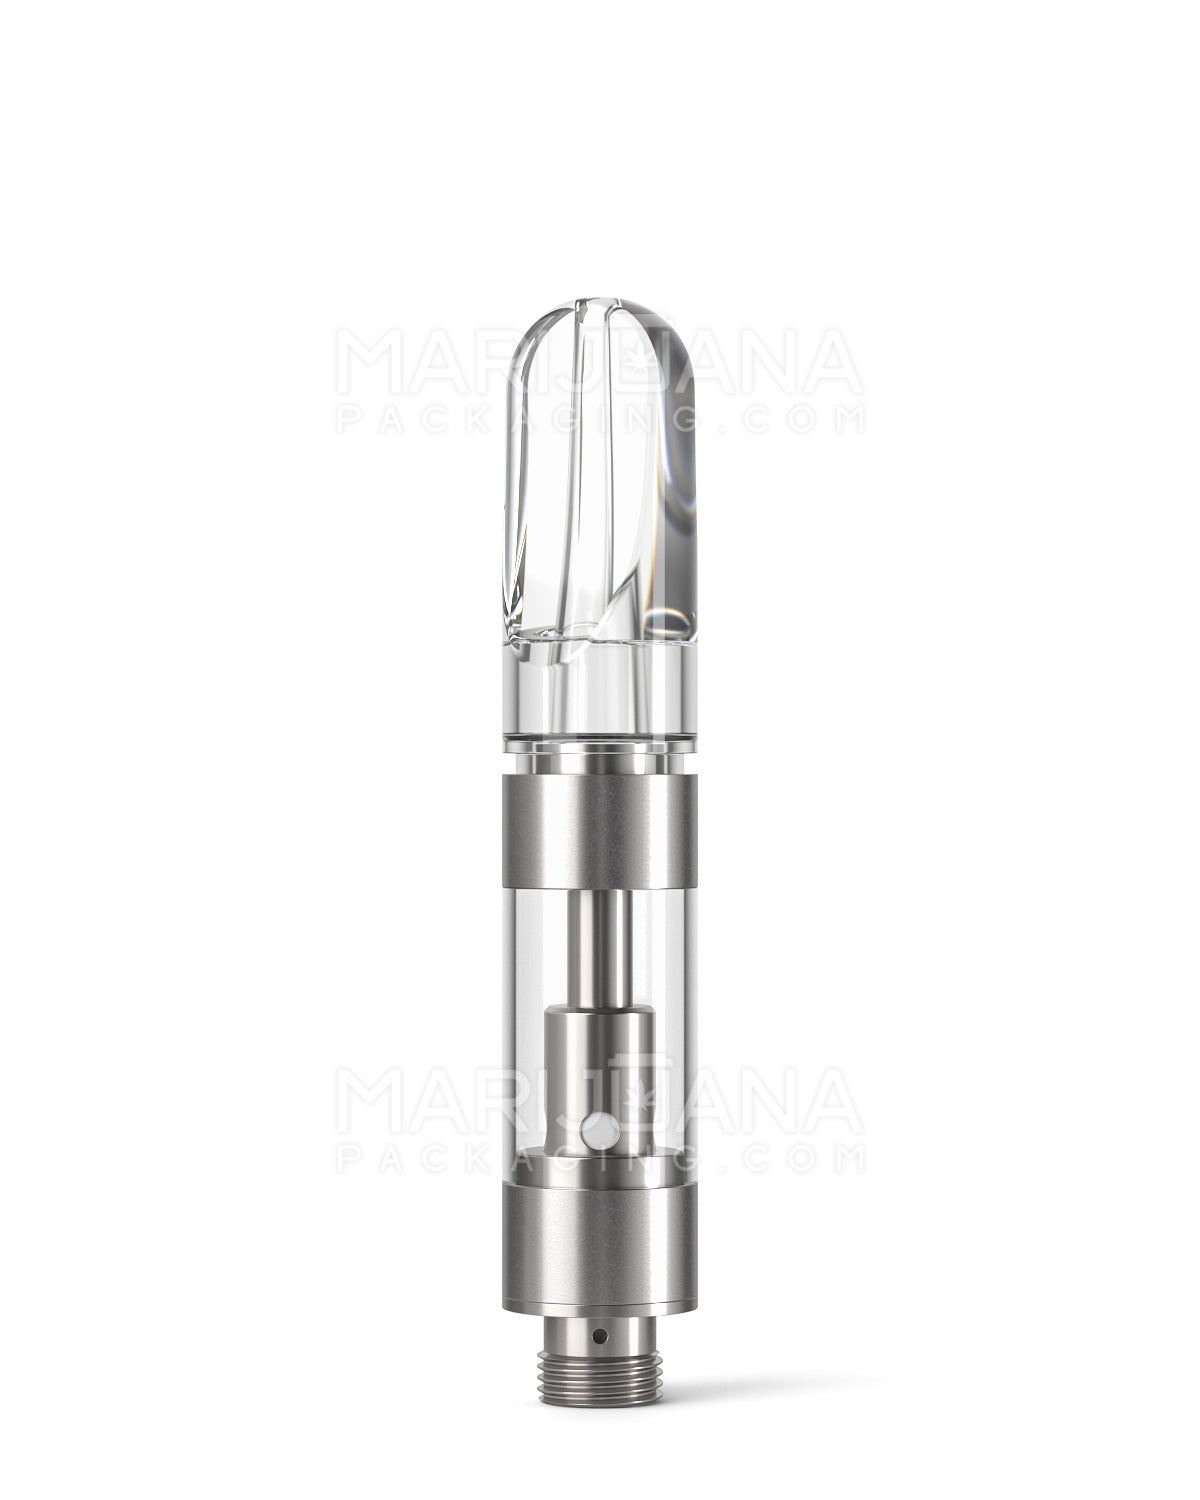 CCELL | Liquid6 Reactor Plastic Vape Cartridge with Clear Plastic Mouthpiece | 0.5mL - Press On - 100 Count - 1